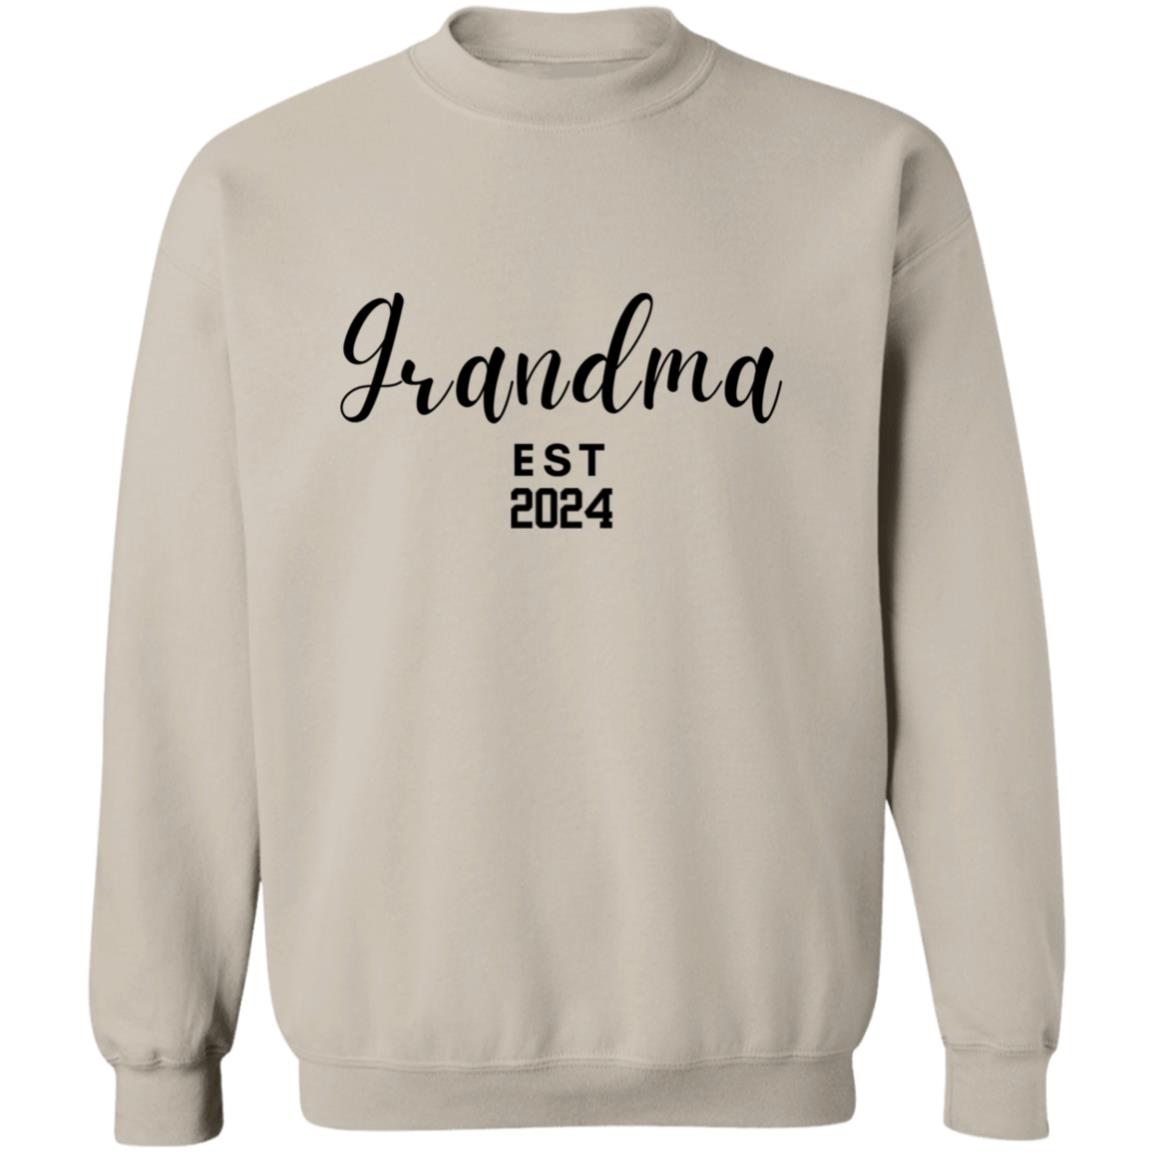 Get trendy with Grandma est. 2023 (6) Grandma Est (year first grandchild born)Crewneck Sweatshirt - Sweatshirts available at Good Gift Company. Grab yours for $24.95 today!